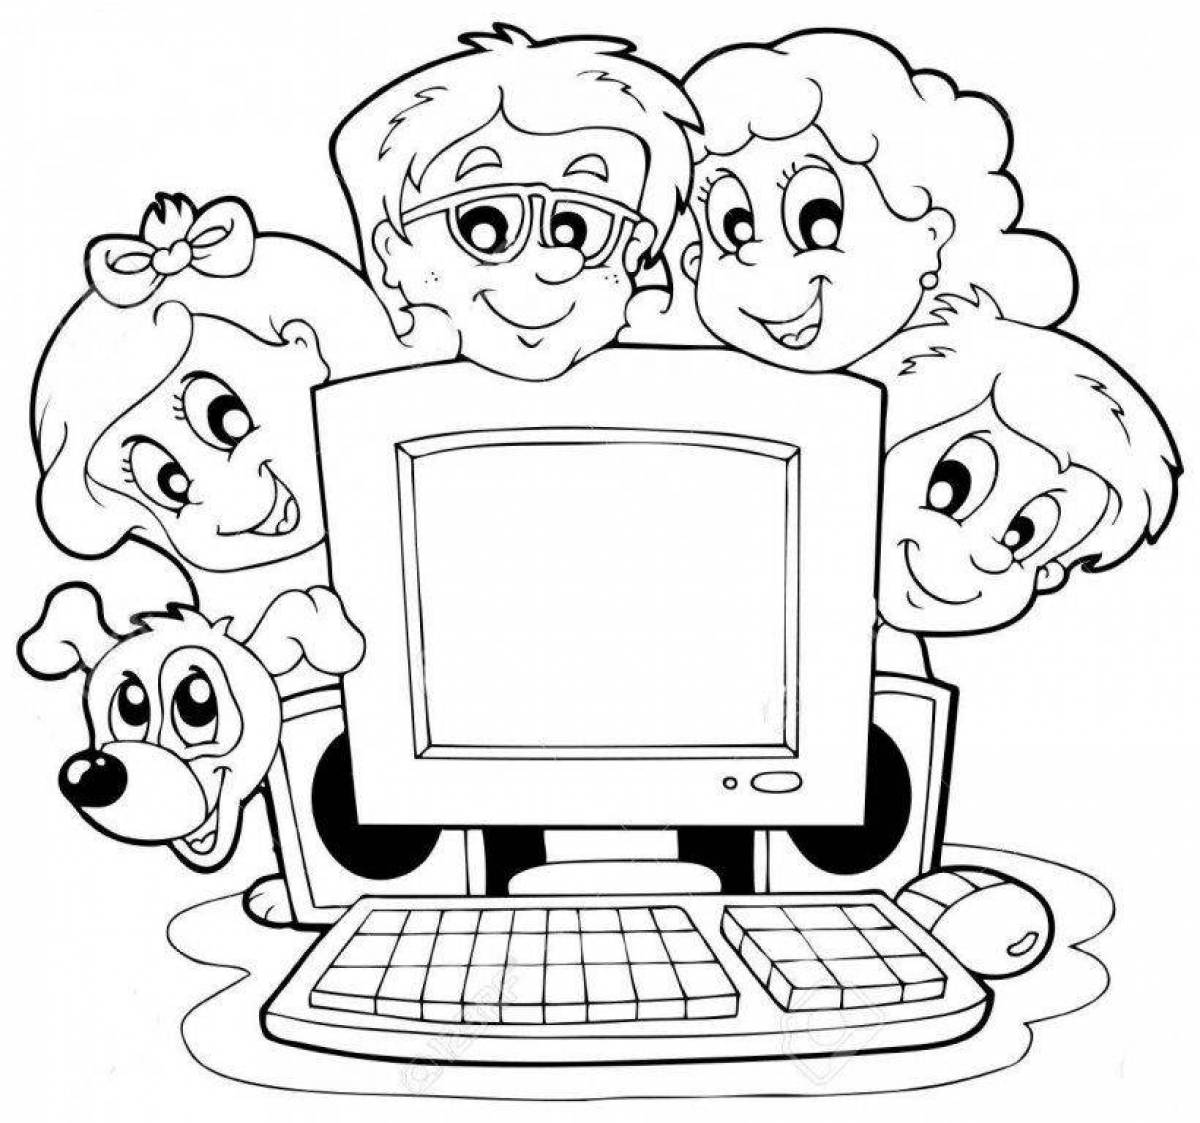 Colorful safe internet coloring page